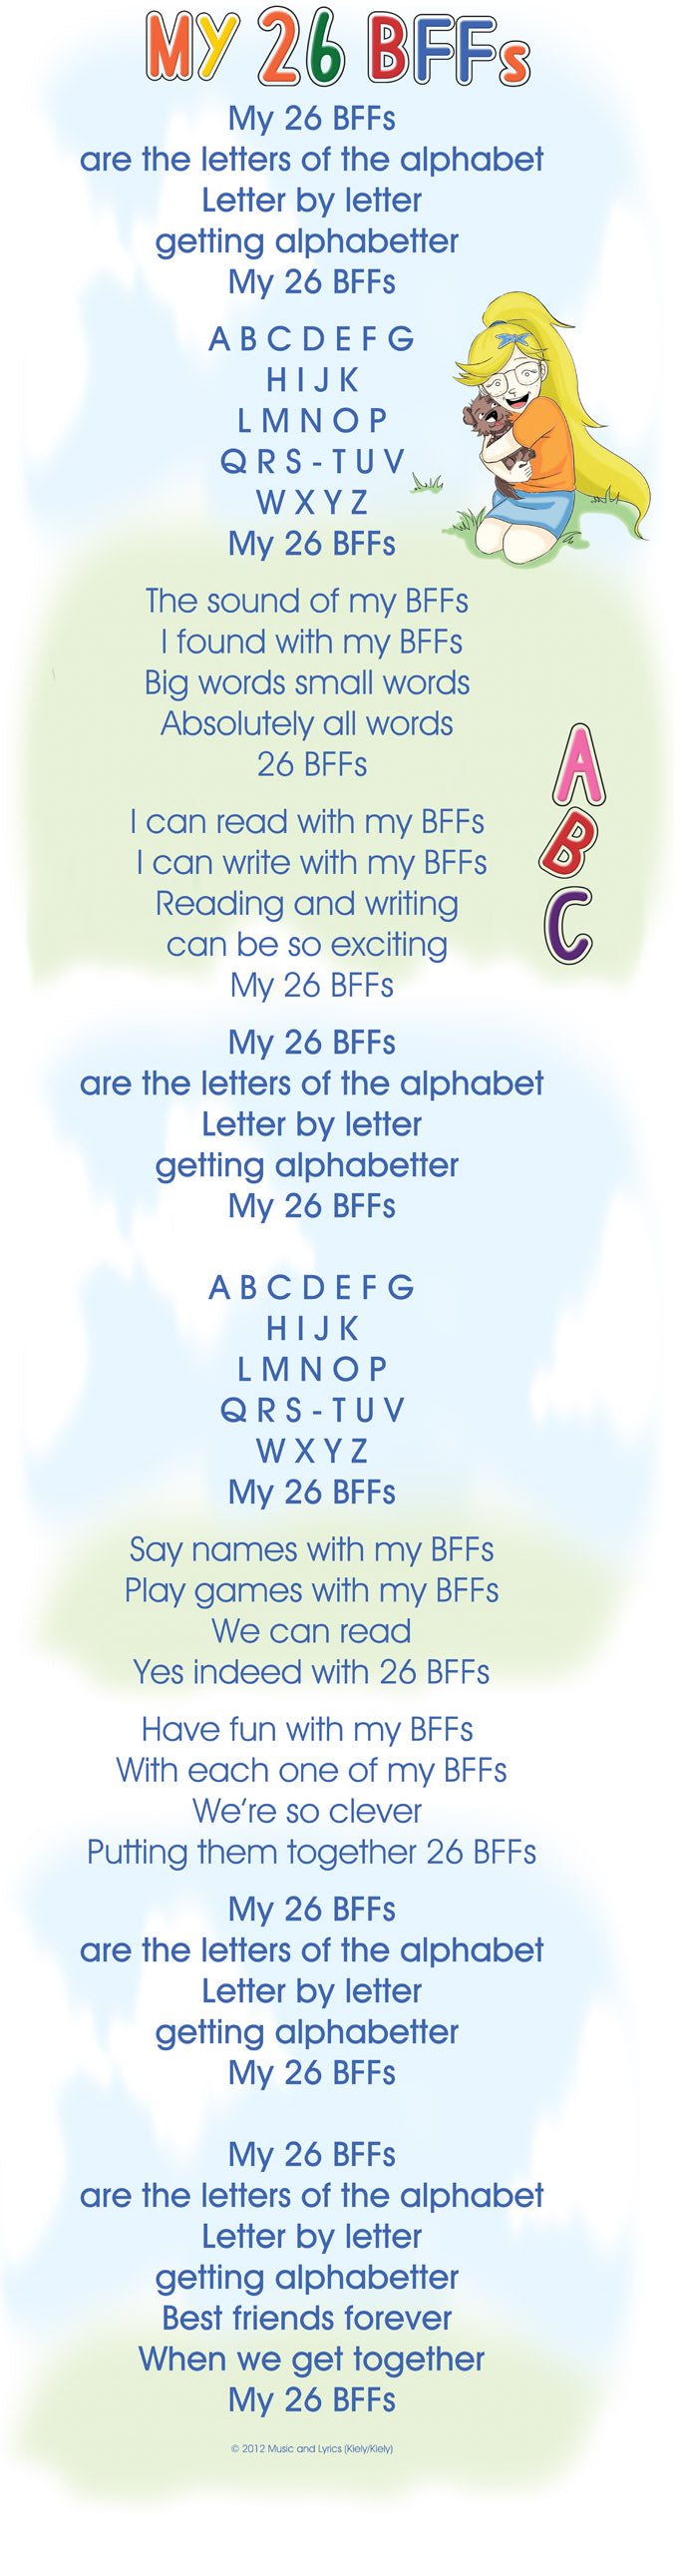 My 26 BFFs are the letters of the alphabet Letter by letter getting alphabetter  My 26 BFFs        A B C D E F G H I J K L M N O P Q R S - T U V W X Y Z My 26 BFFs       The sound of my BFFs  I found with my BFFs Big words small words  Absolutely all words  26 BFFs      I can read with my BFFs  I can write with my BFFs Reading and writing  can be so exciting  My 26 BFFs        My 26 BFFs are the letters of the alphabet Letter by letter getting alphabetter  My 26 BFFs  A B C D E F G H I J K L M N O P Q R S - T U V W X Y Z My 26 BFFs        Say names with my BFFs Play games with my BFFs We can read Yes indeed with 26 BFFs        Have fun with my BFFs  With each one of my BFFs We’re so clever  Putting them together 26 BFFs        My 26 BFFs are the letters of the alphabet Letter by letter getting alphabetter  My 26 BFFs  My 26 BFFs are the letters of the alphabet Letter by letter getting alphabetter  Best friends forever  When we get together My 26 BFFs